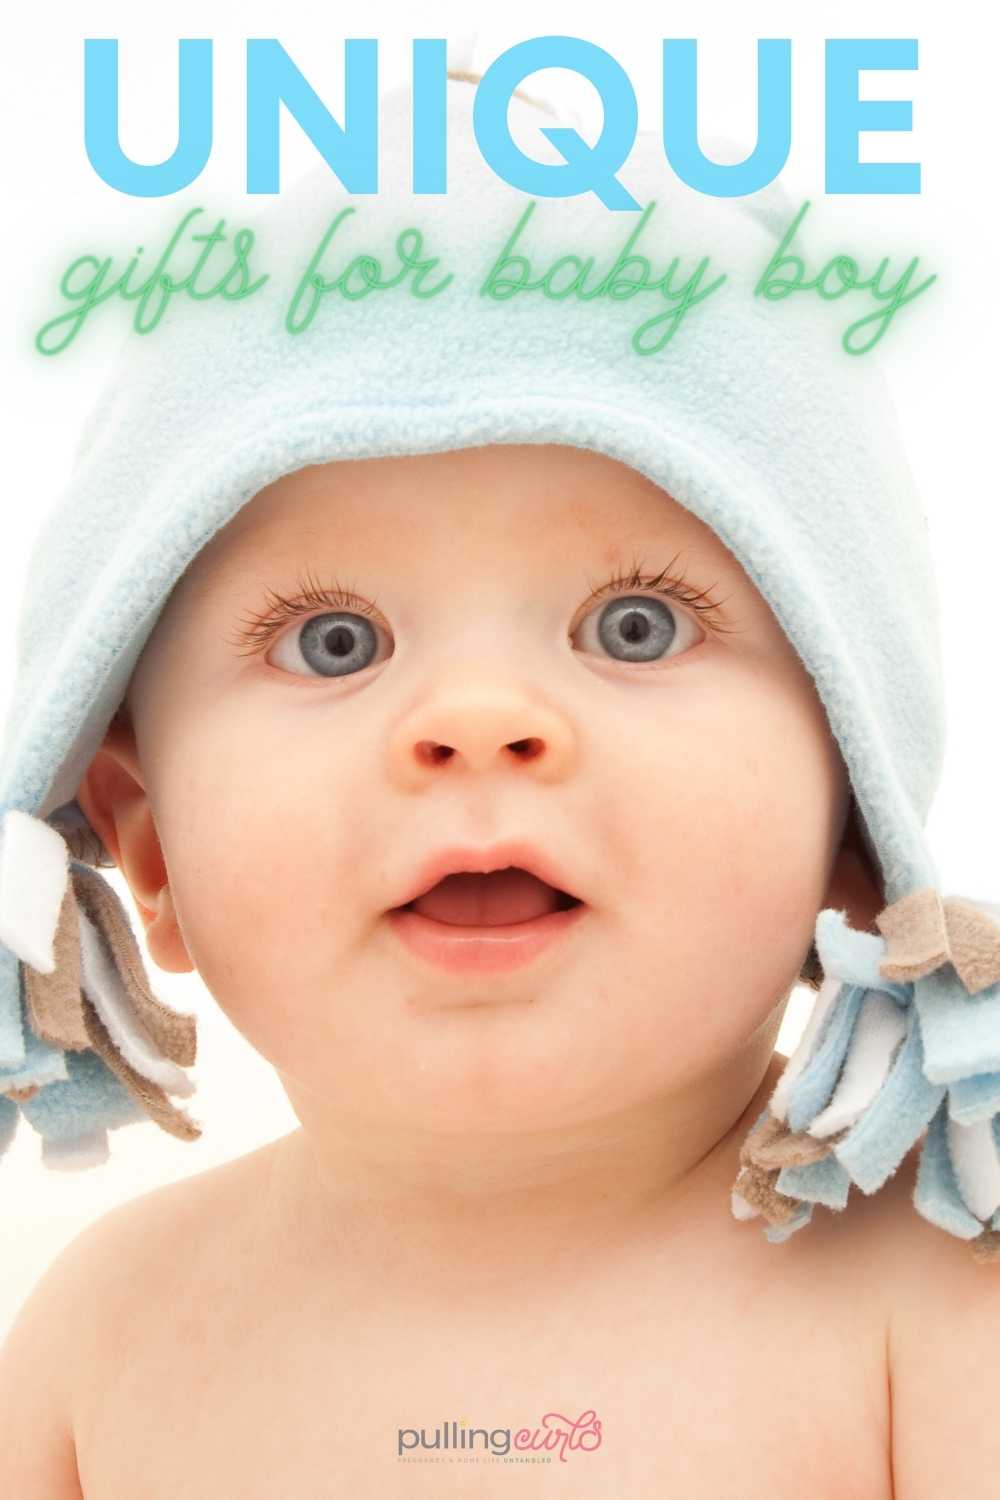 Unique gifts for baby boy. Baby boy with blue hat on. via @pullingcurls